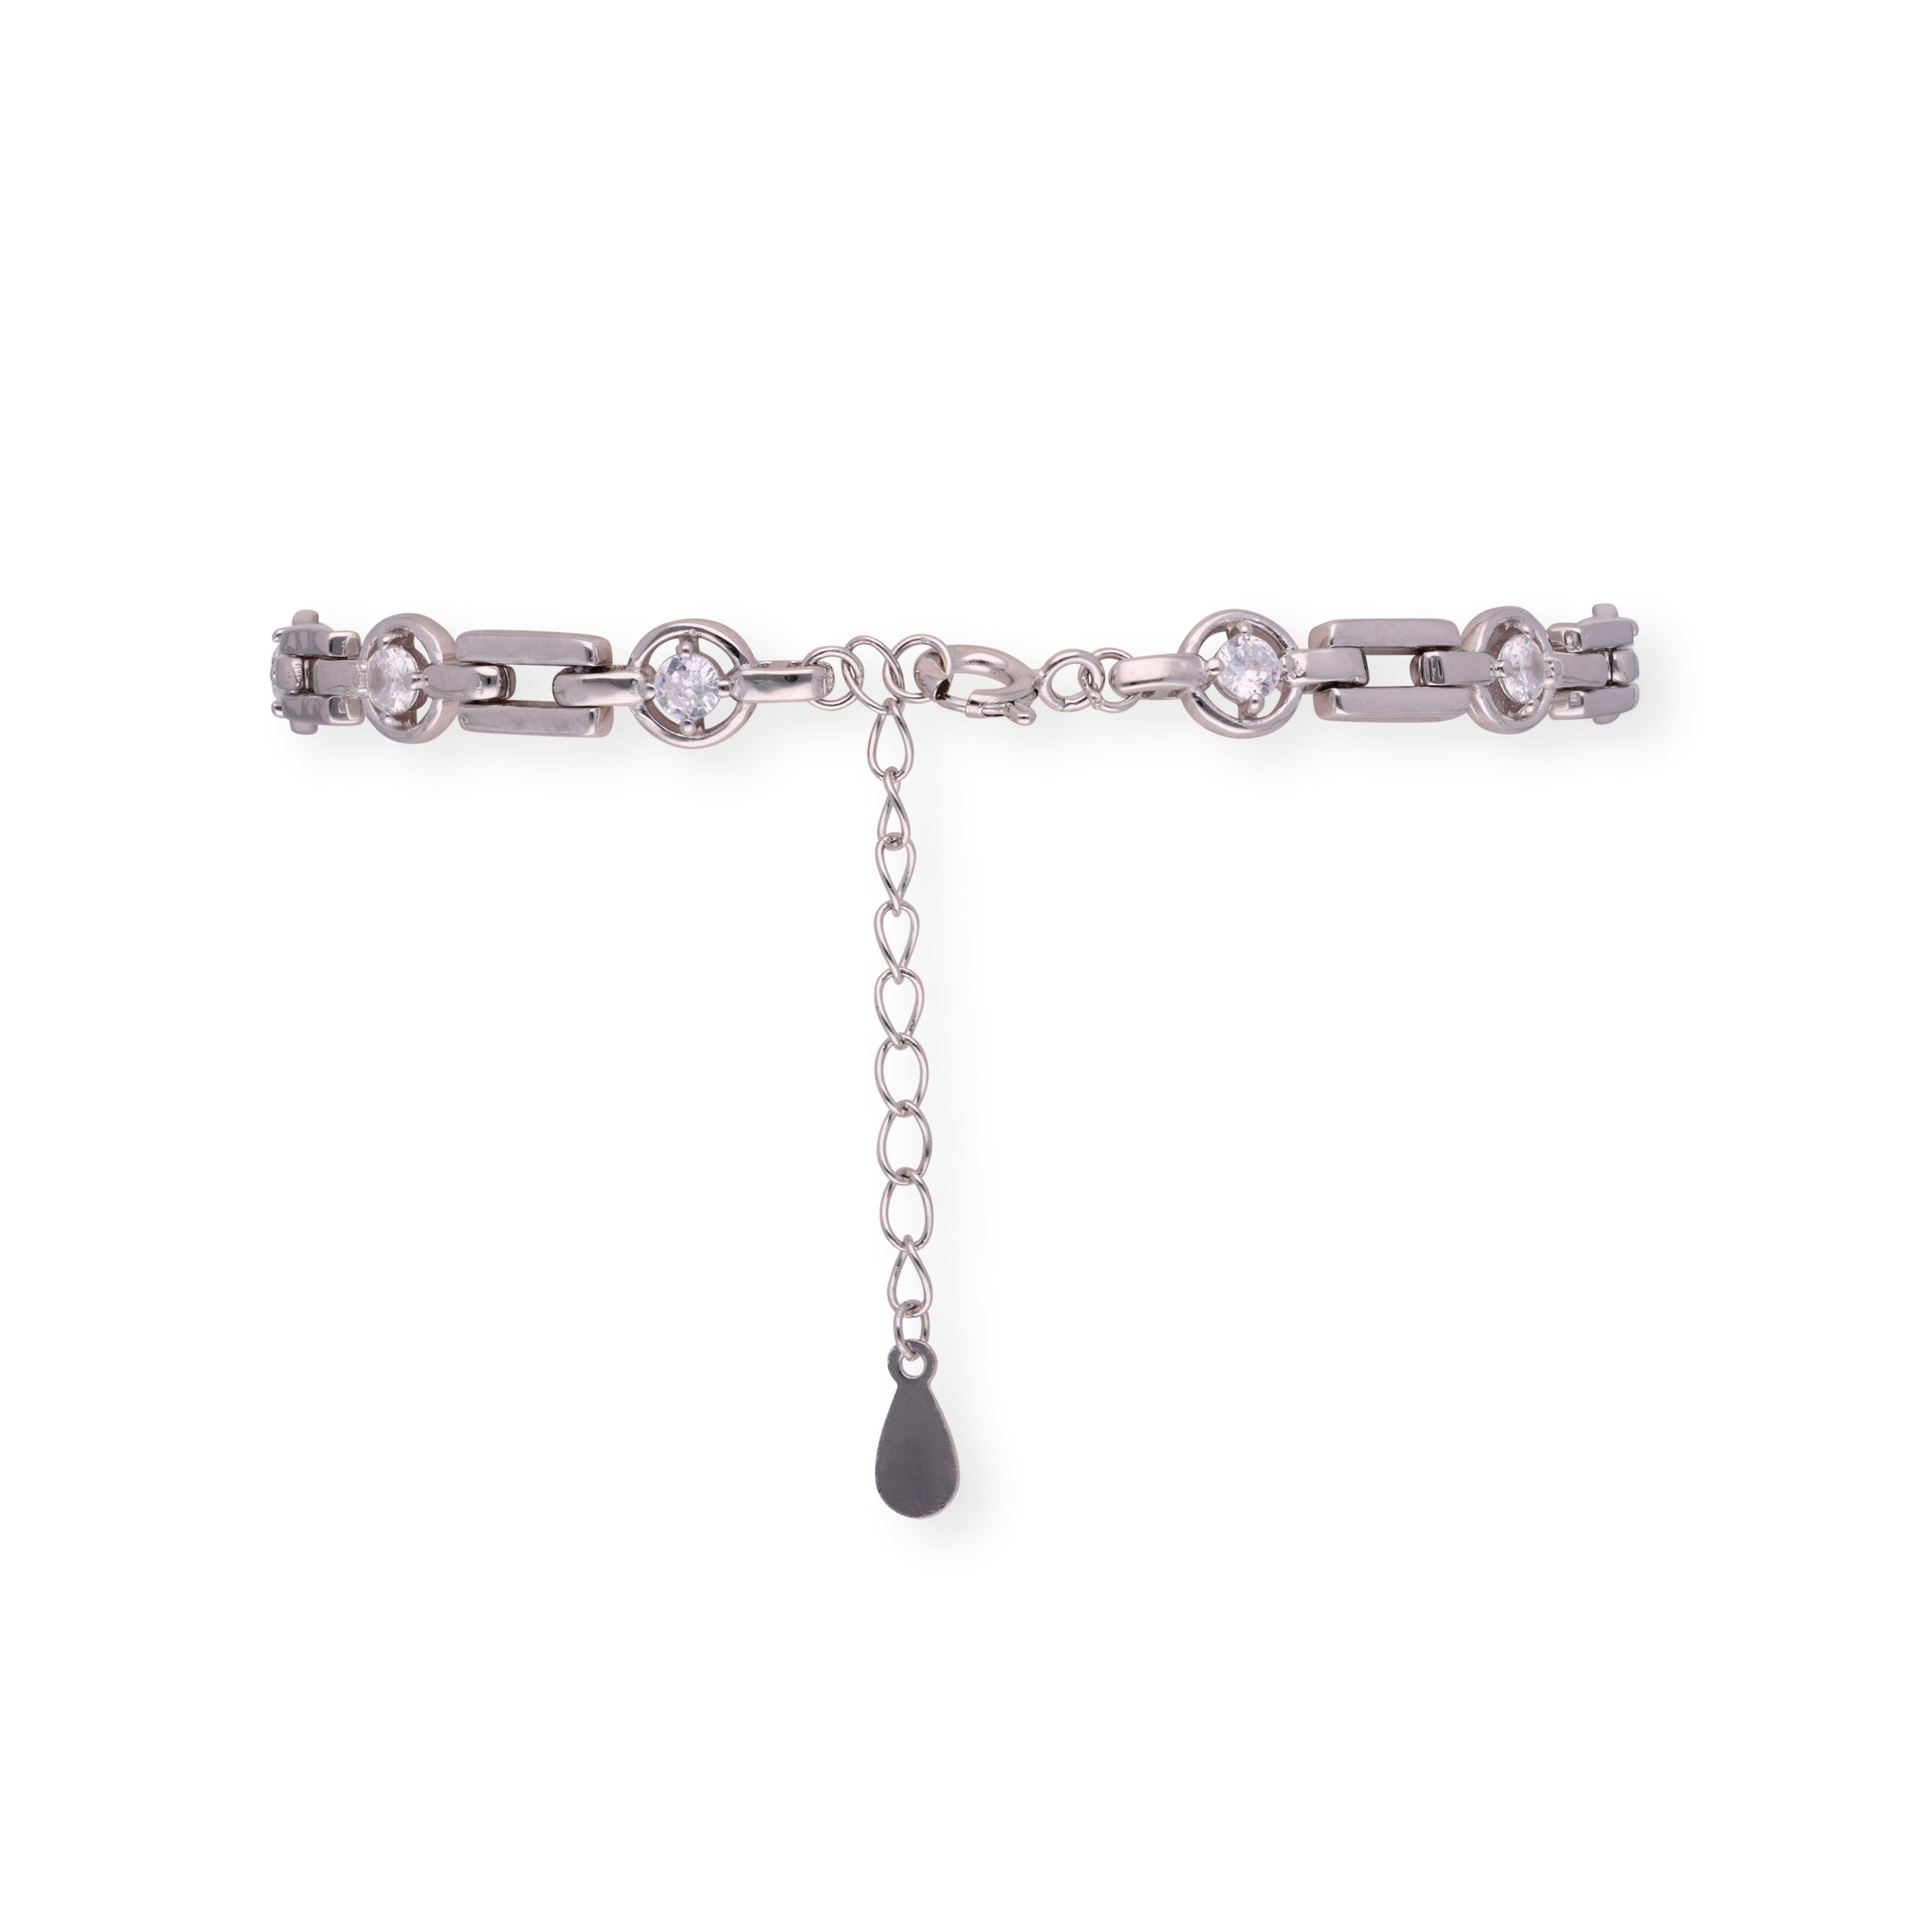 Sterling Silver Single Line Bracelet with Cubic Zirconia and Glossy Finish | SKU : 0003114087, 0003114094